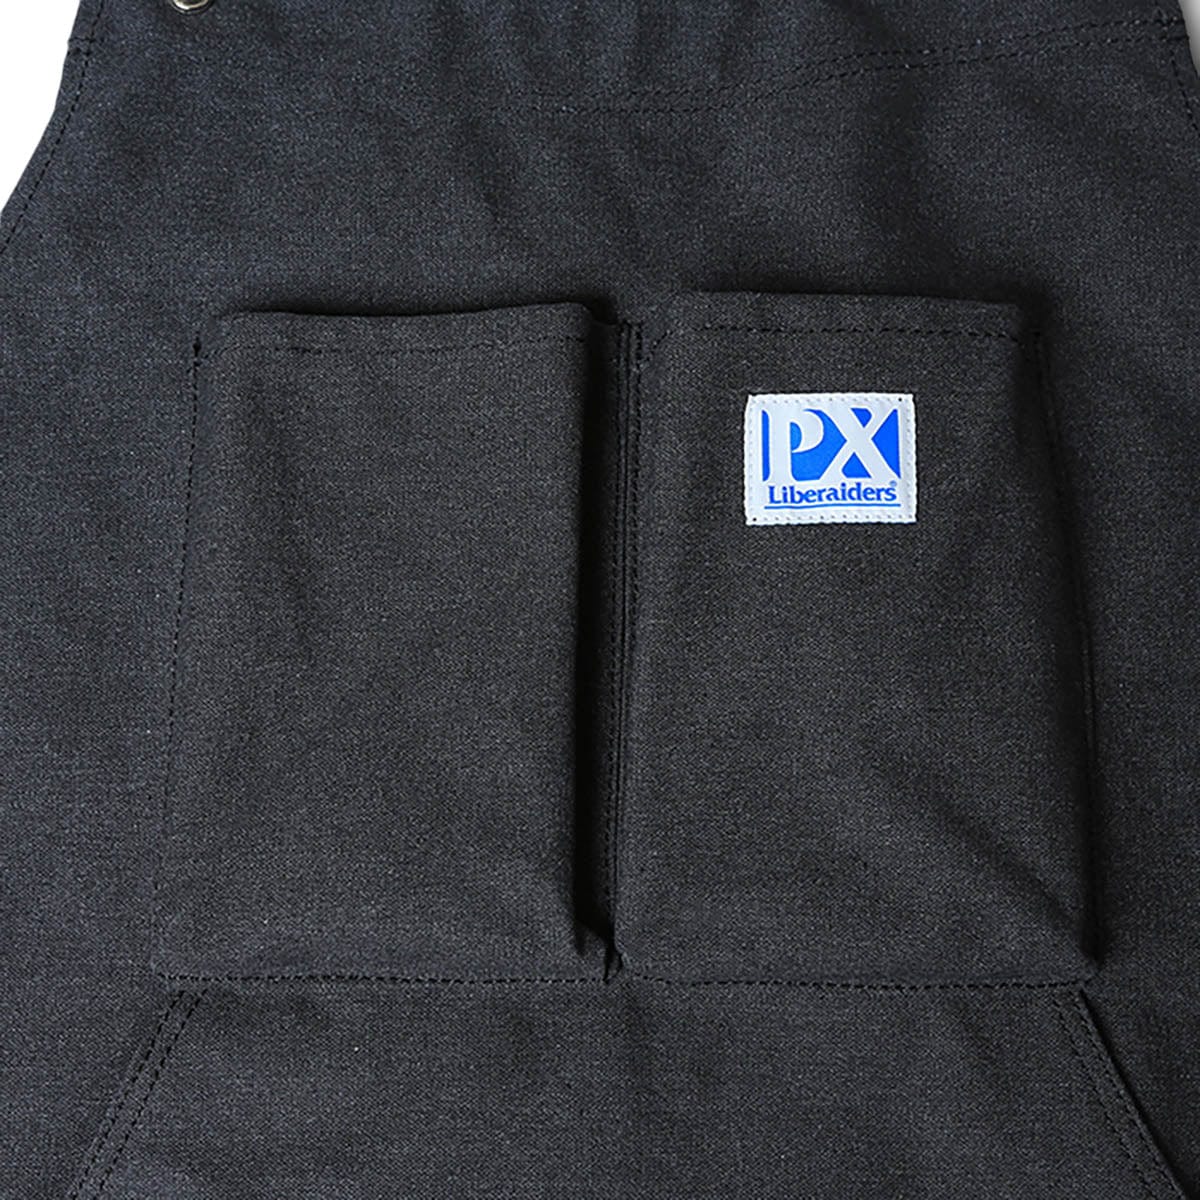 Liberaiders Odds & Ends BLACK / O/S PX APRON